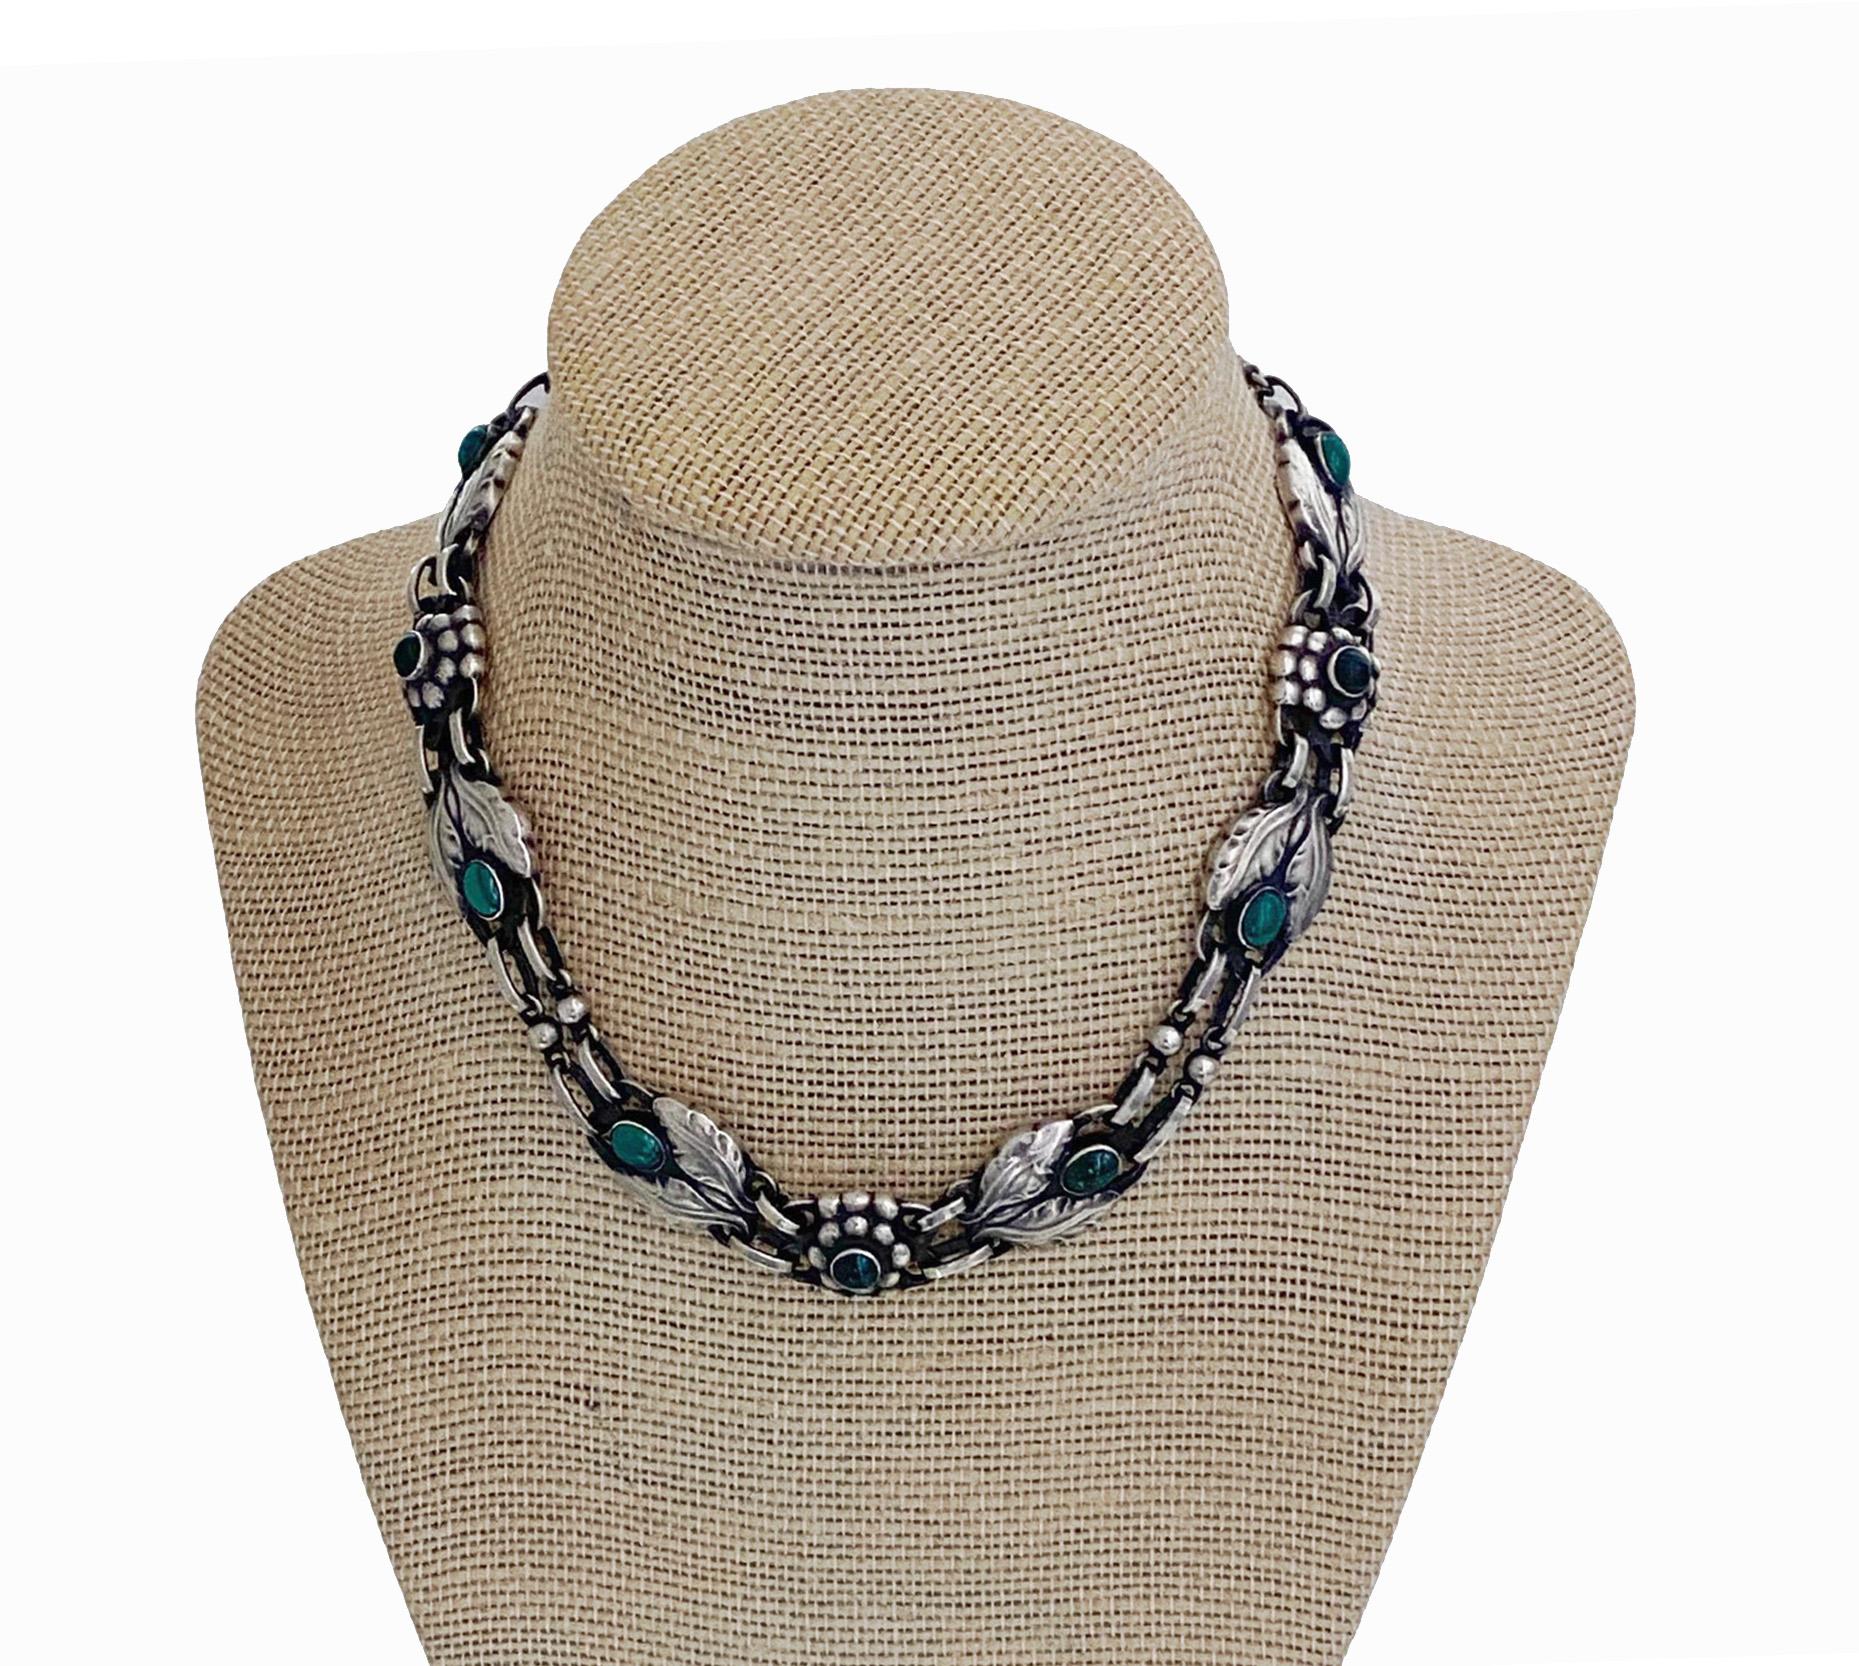 Georg Jensen Malachite and Sterling Silver Necklace No 1, C.1933. Bezel set oval and round malachite with stylised bud leaves and berries interval links. Full Jensen marks and GI marks to reverse. Length14.25 inches. Item Weight: 55.43 grams.